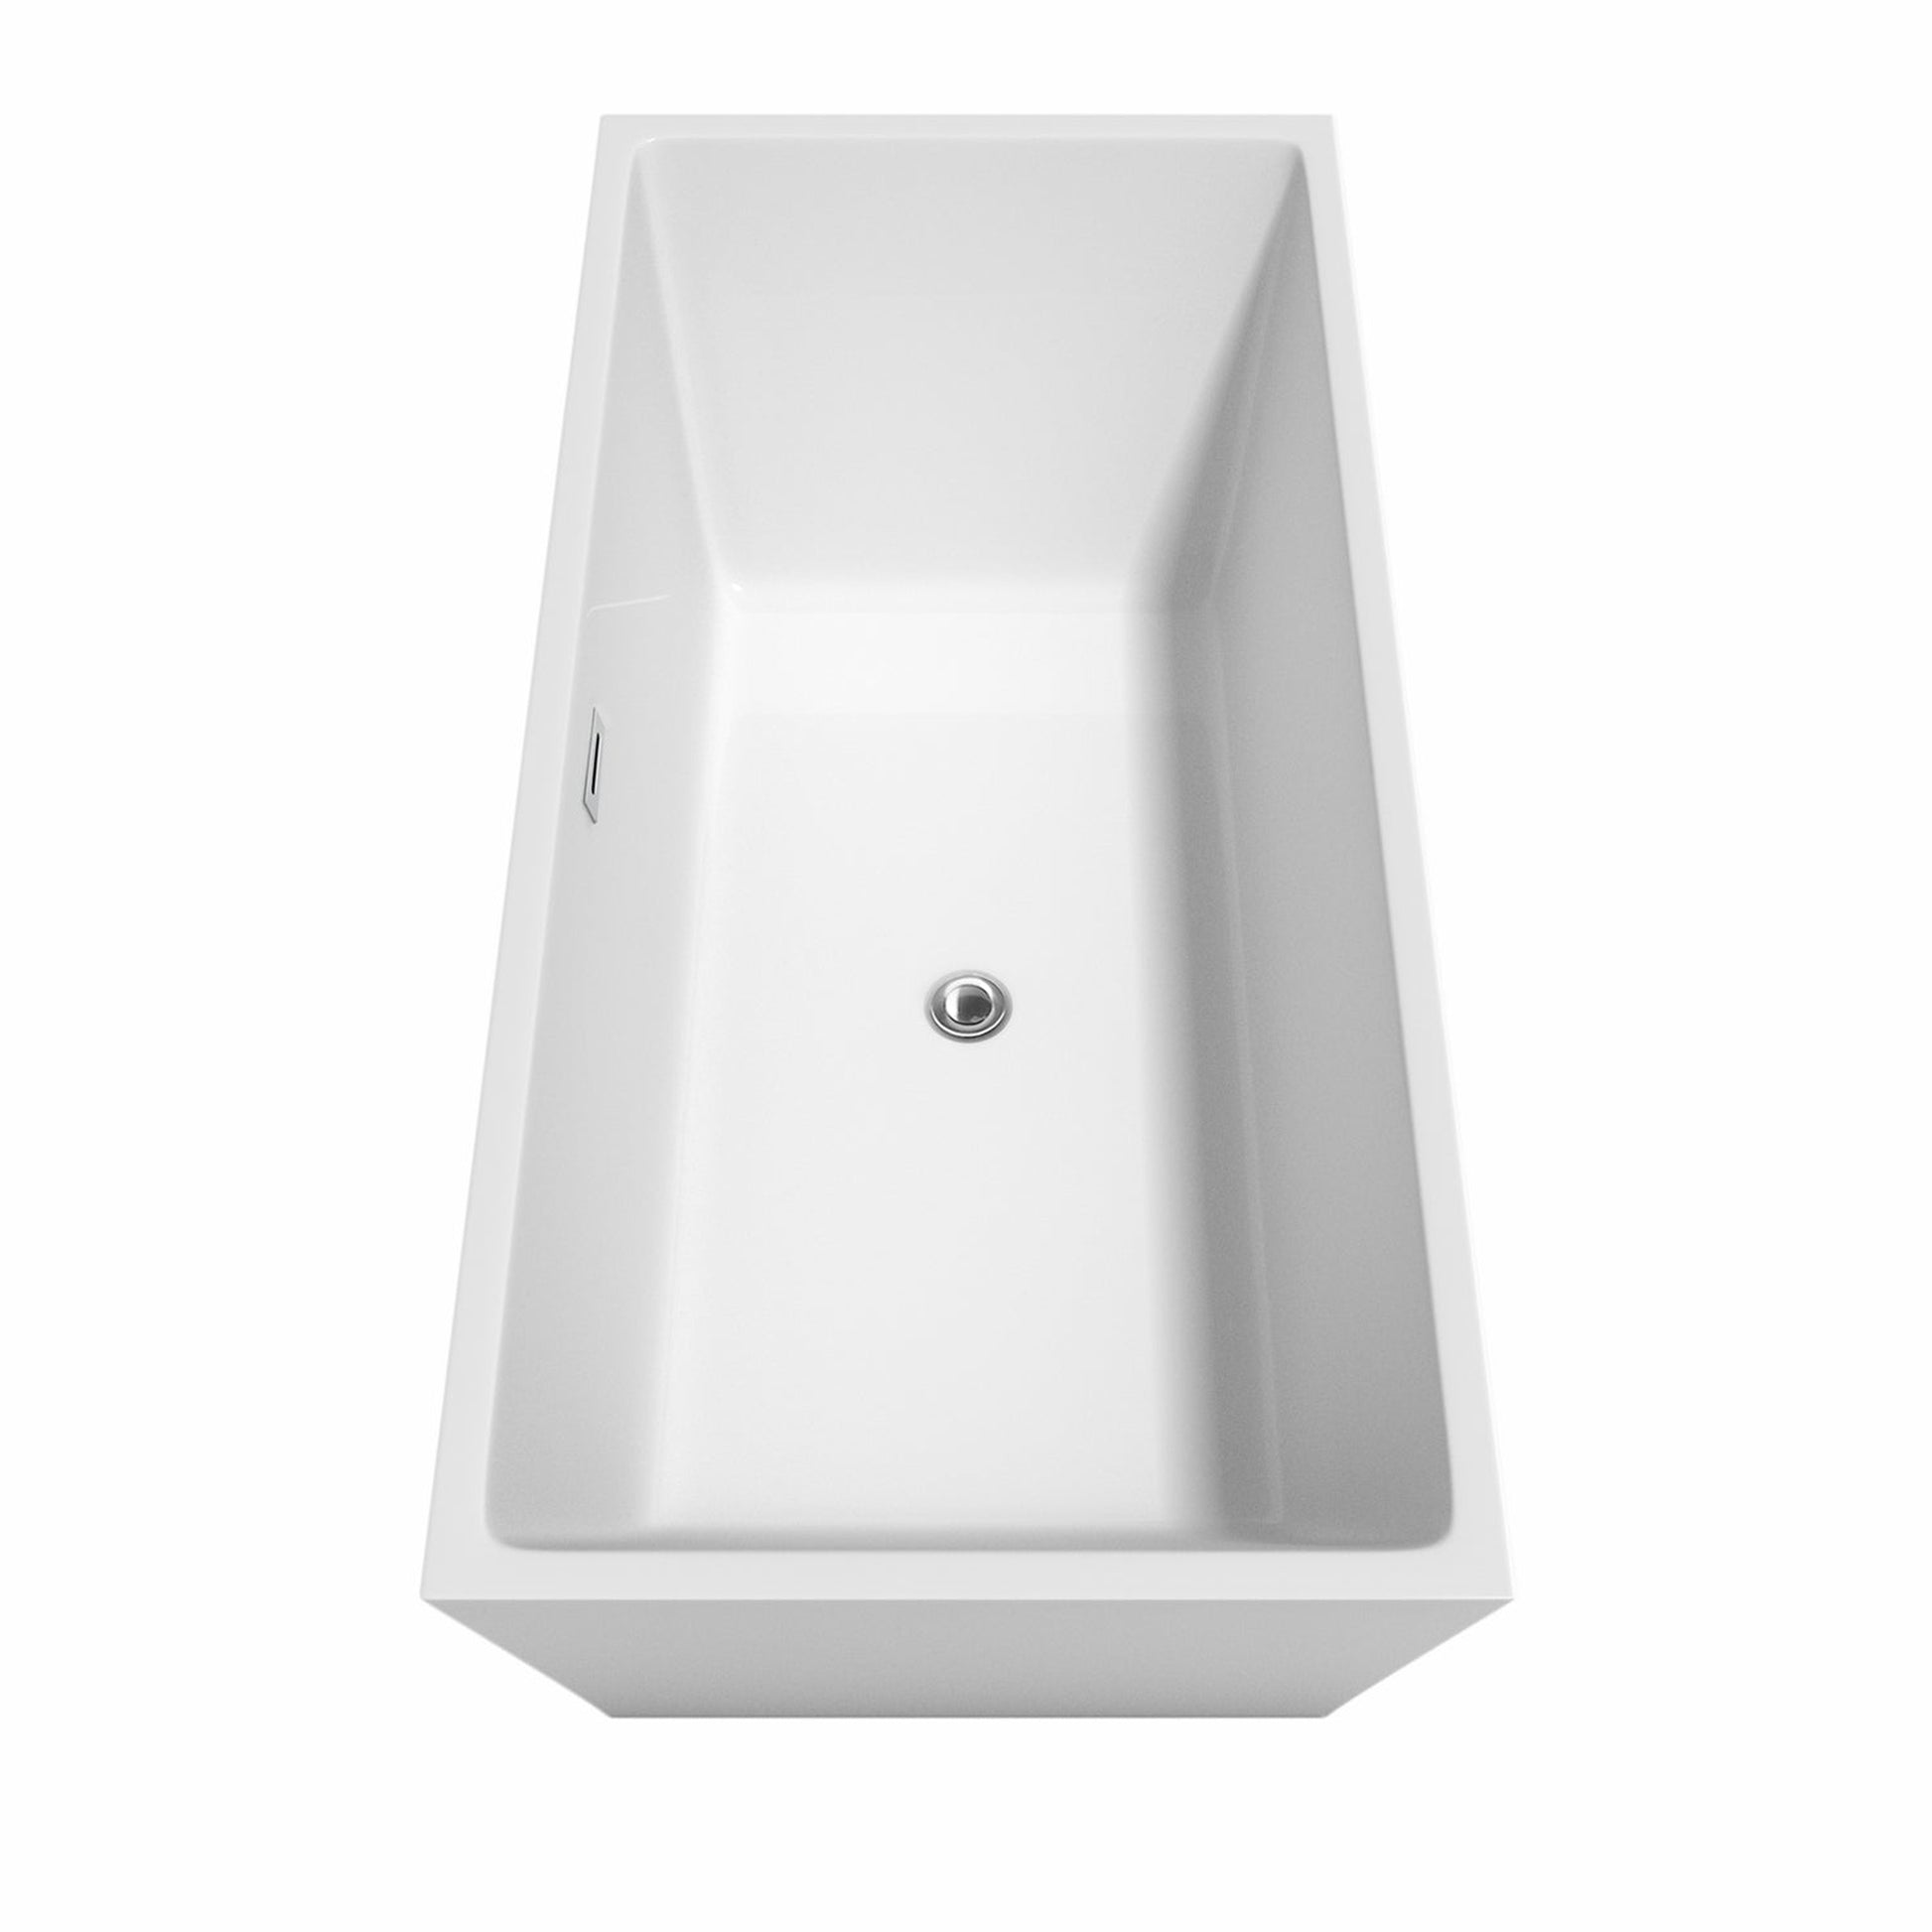 Wyndham Collection Sara 67" Freestanding Bathtub in White With Floor Mounted Faucet, Drain and Overflow Trim in Polished Chrome